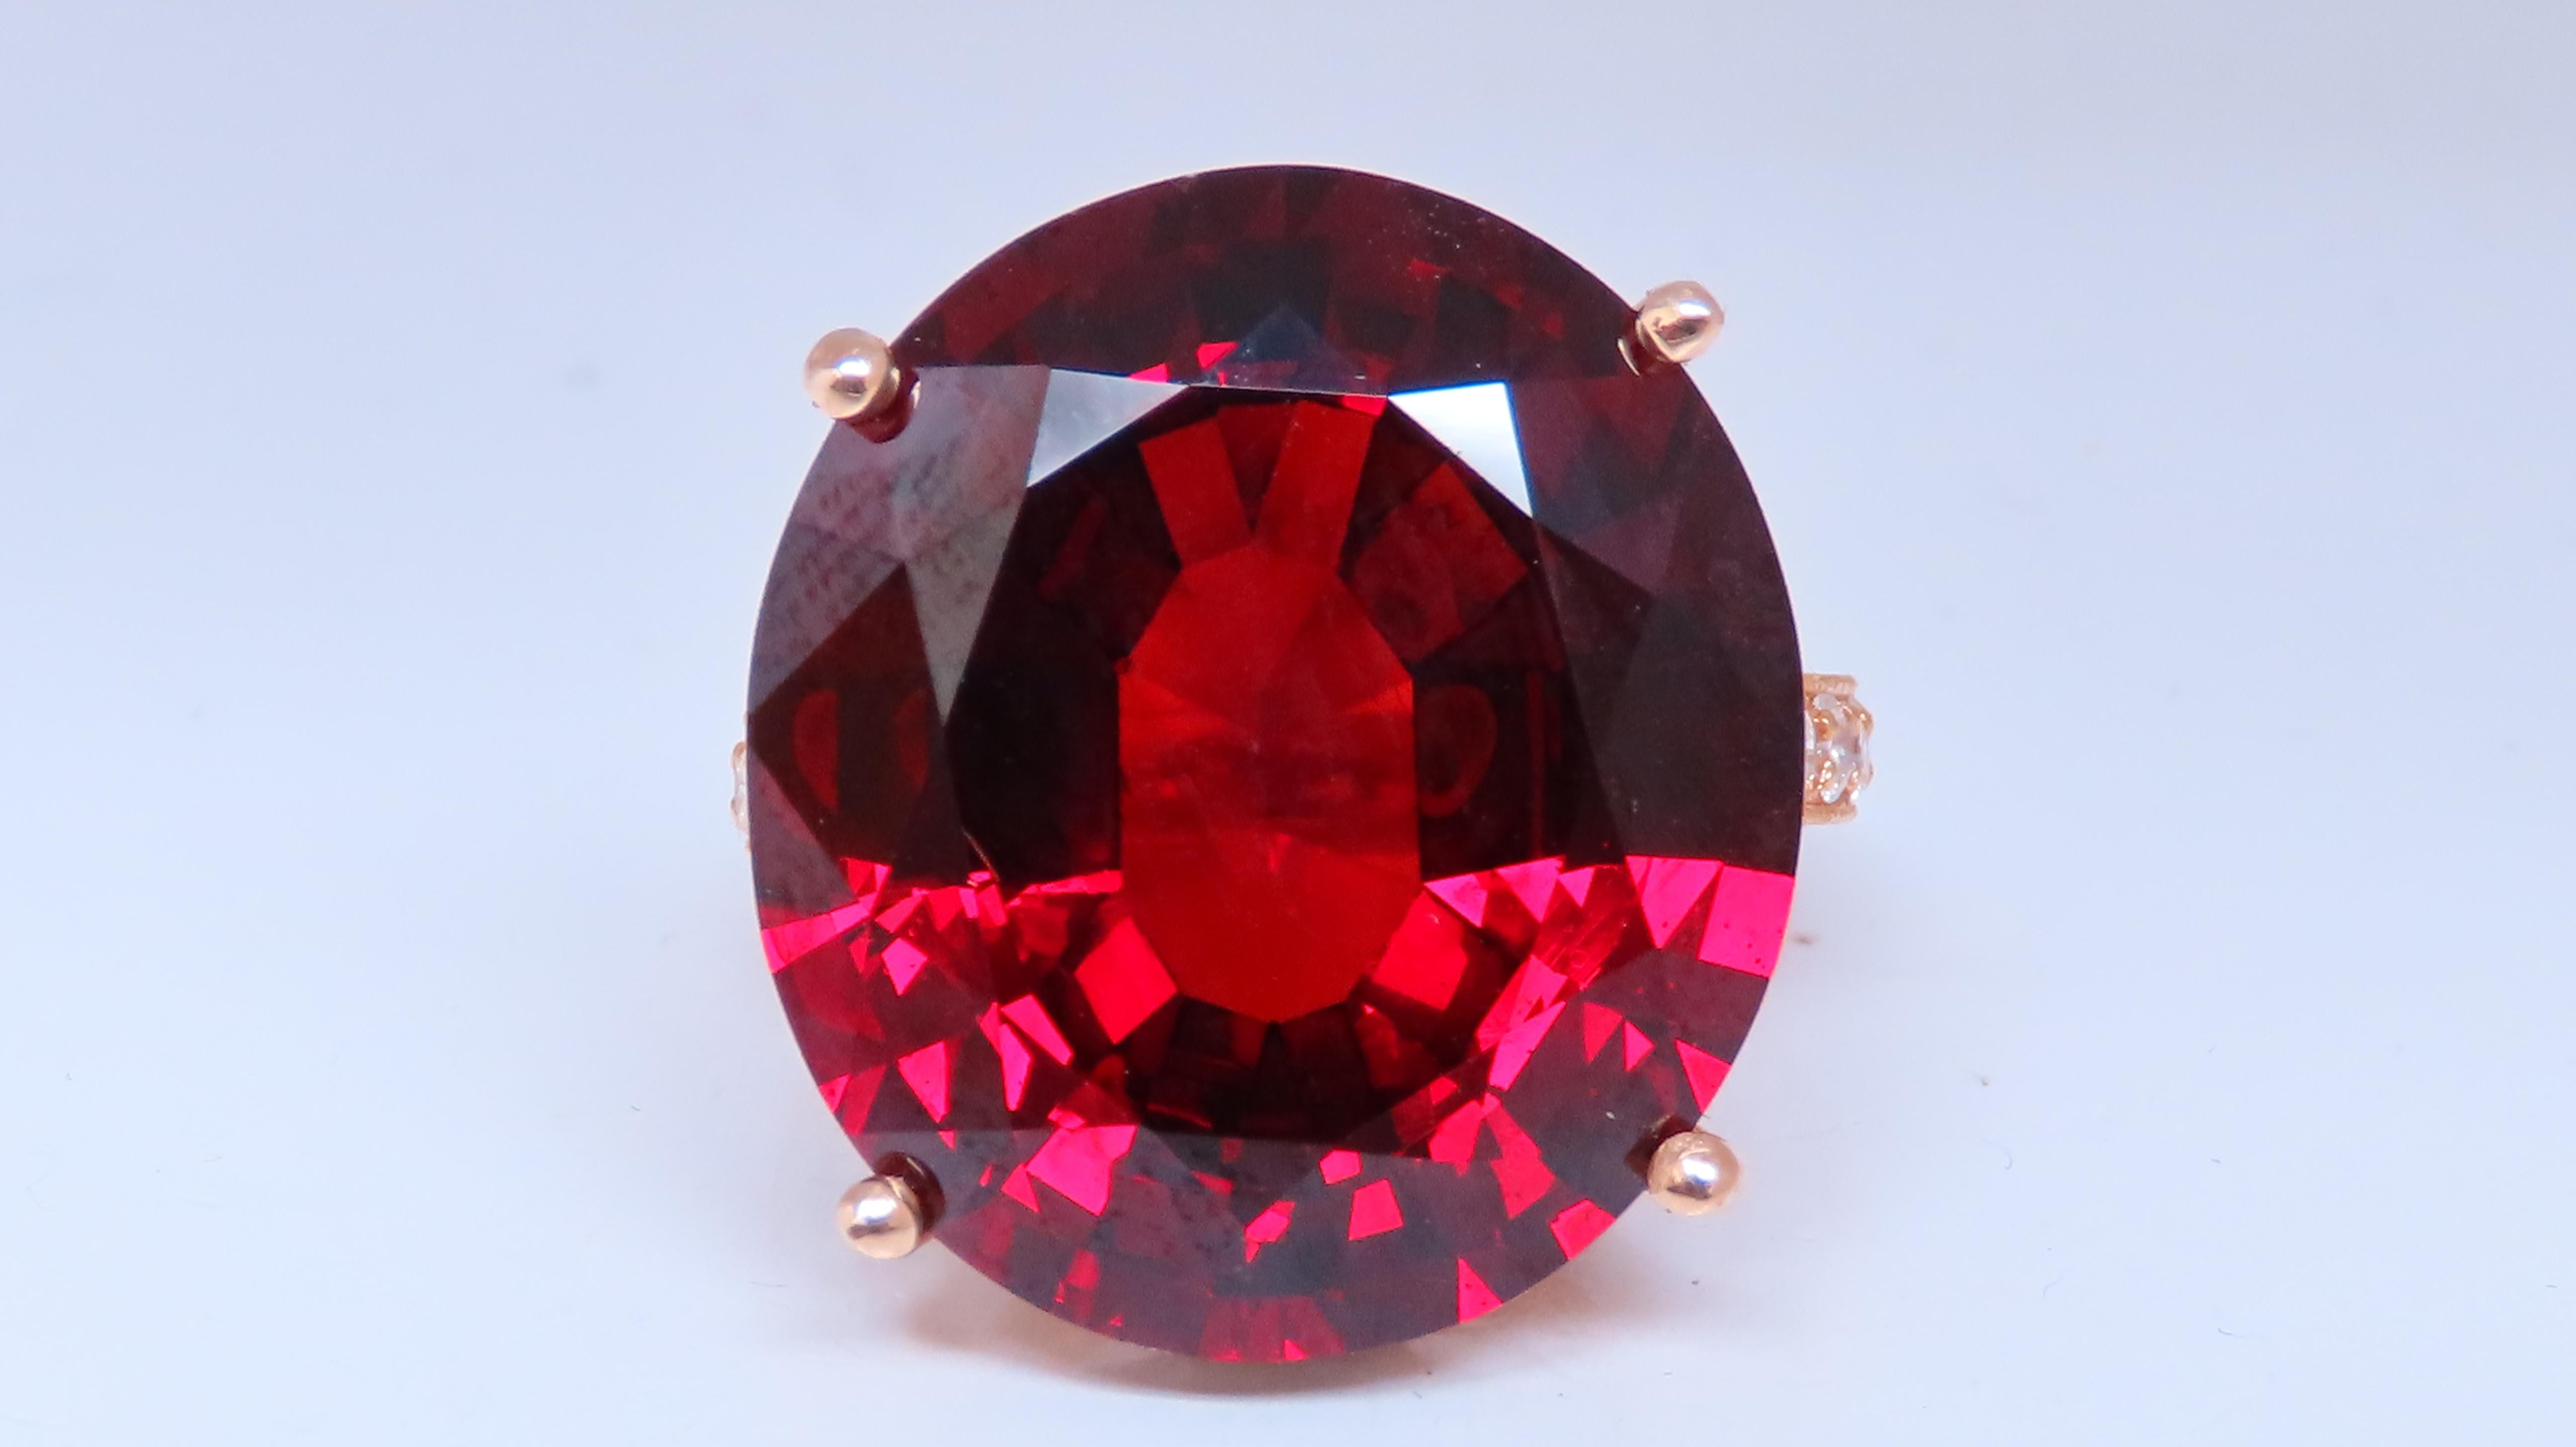 32.75ct. Natural Spessartite Garnet diamond ring.
21.50 X 19mm- 
Natural Diamonds encrusted throughout in French pave style setting- all done by hand!
F-G color, Vs-2 clarity.
14kt. yellow gold & 12.6 grams.
Size 7.